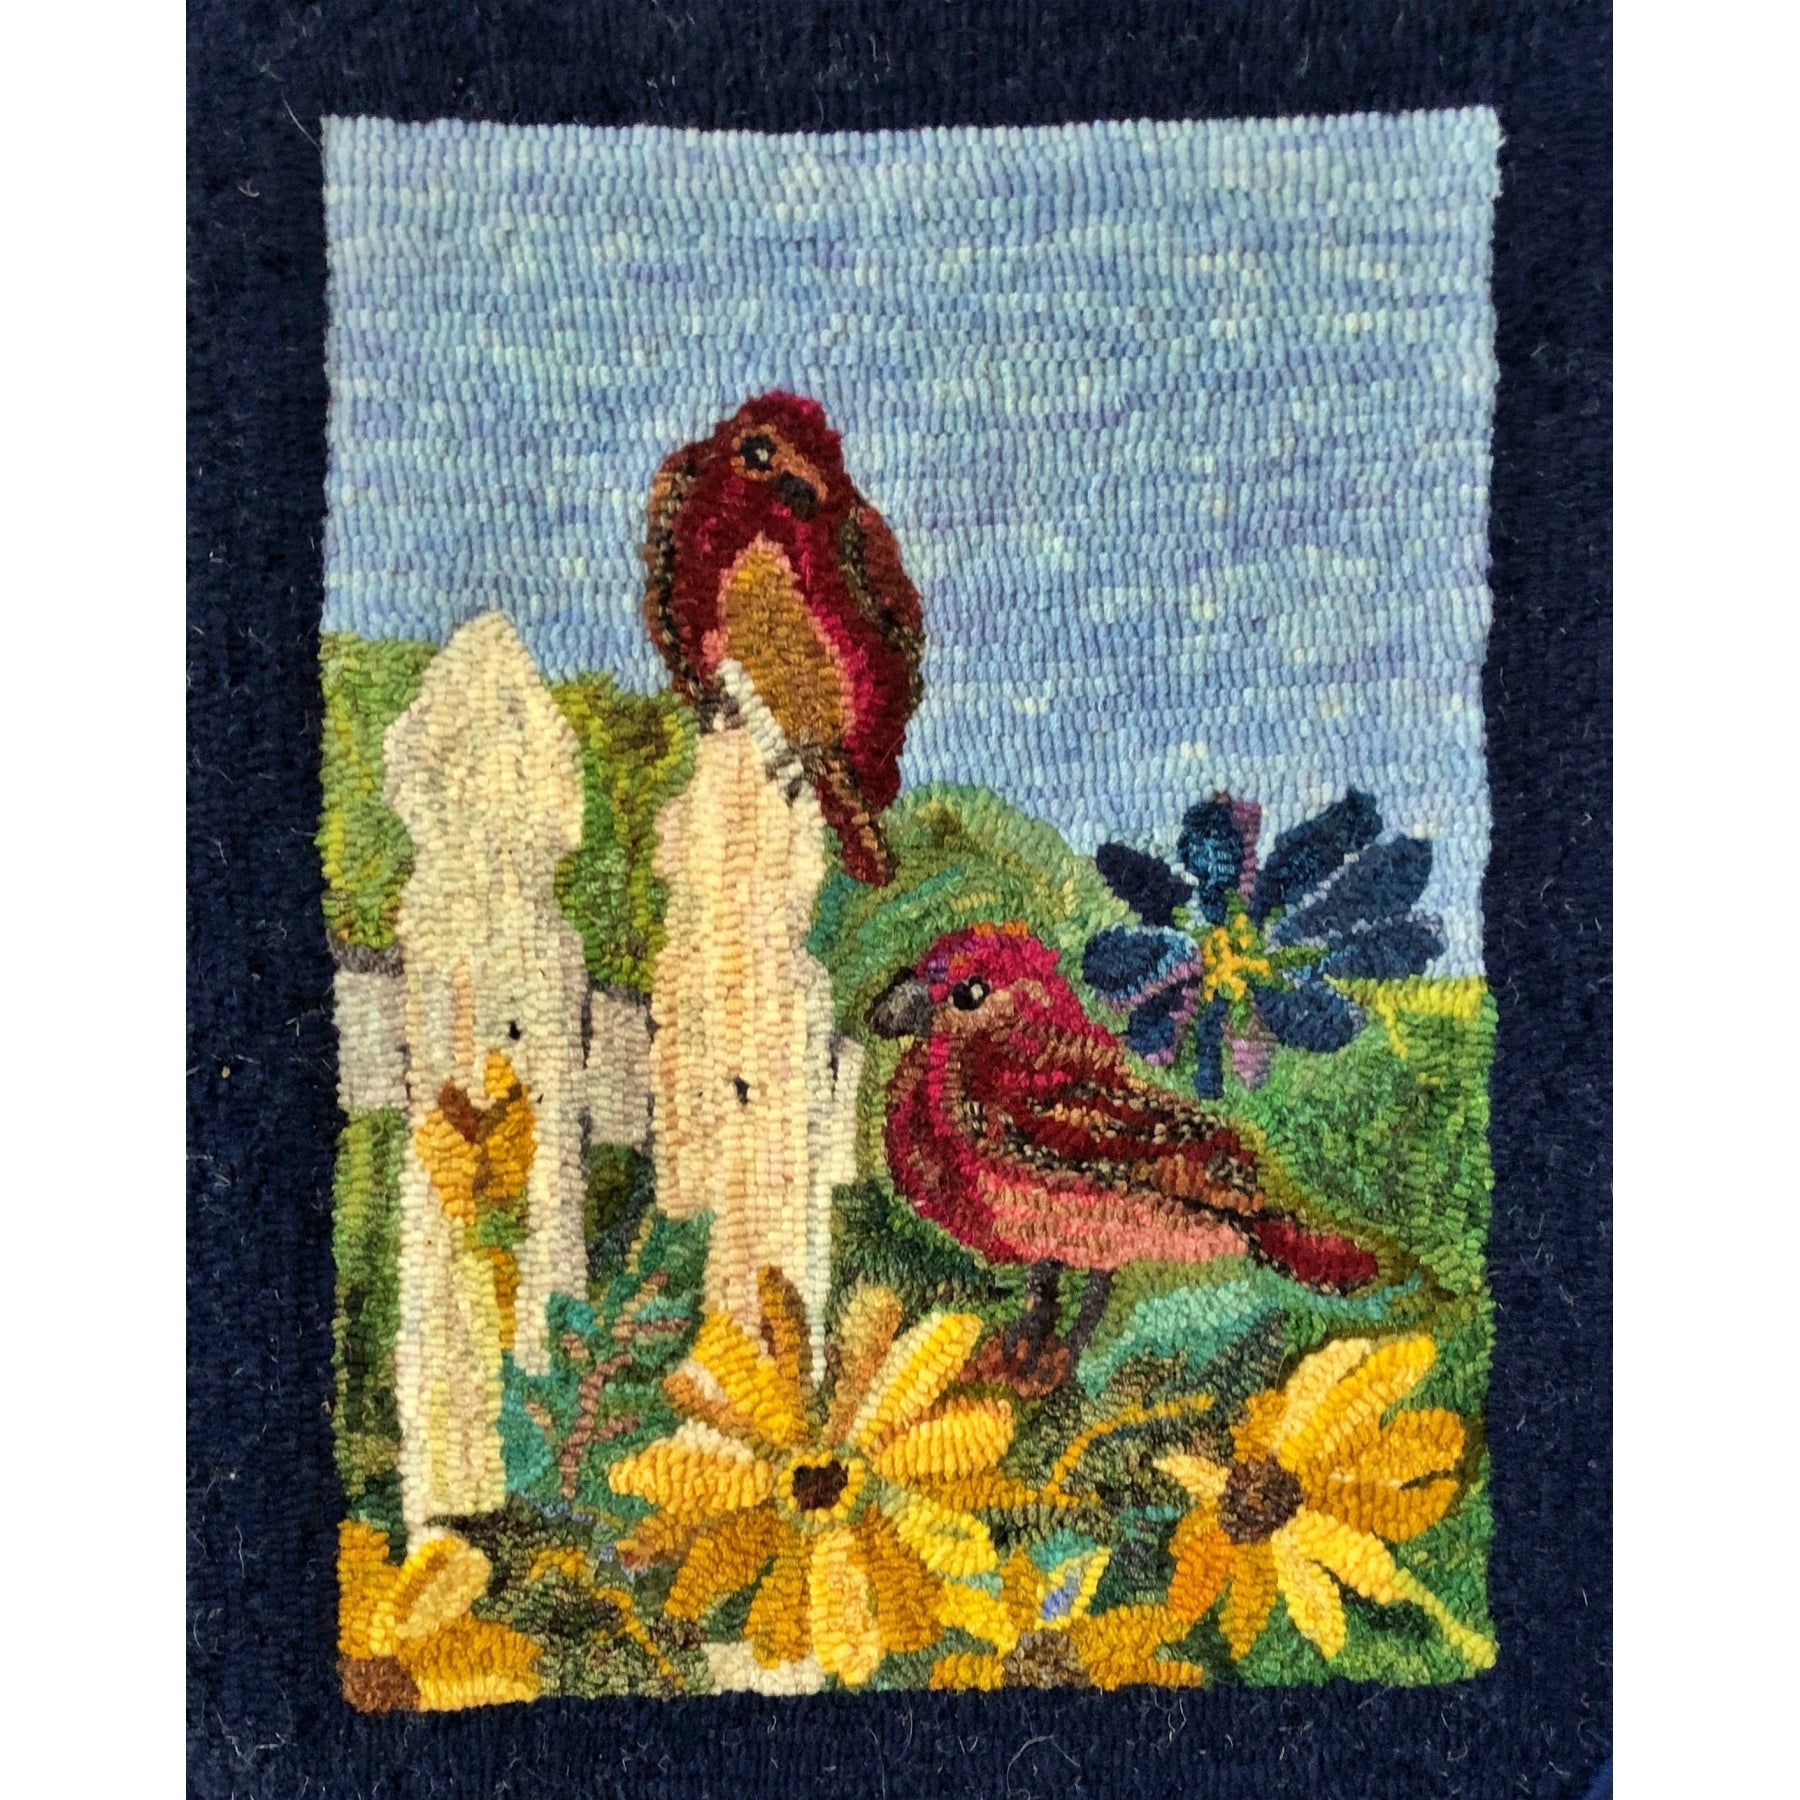 Finches, rug hooked by Celeste Bessette